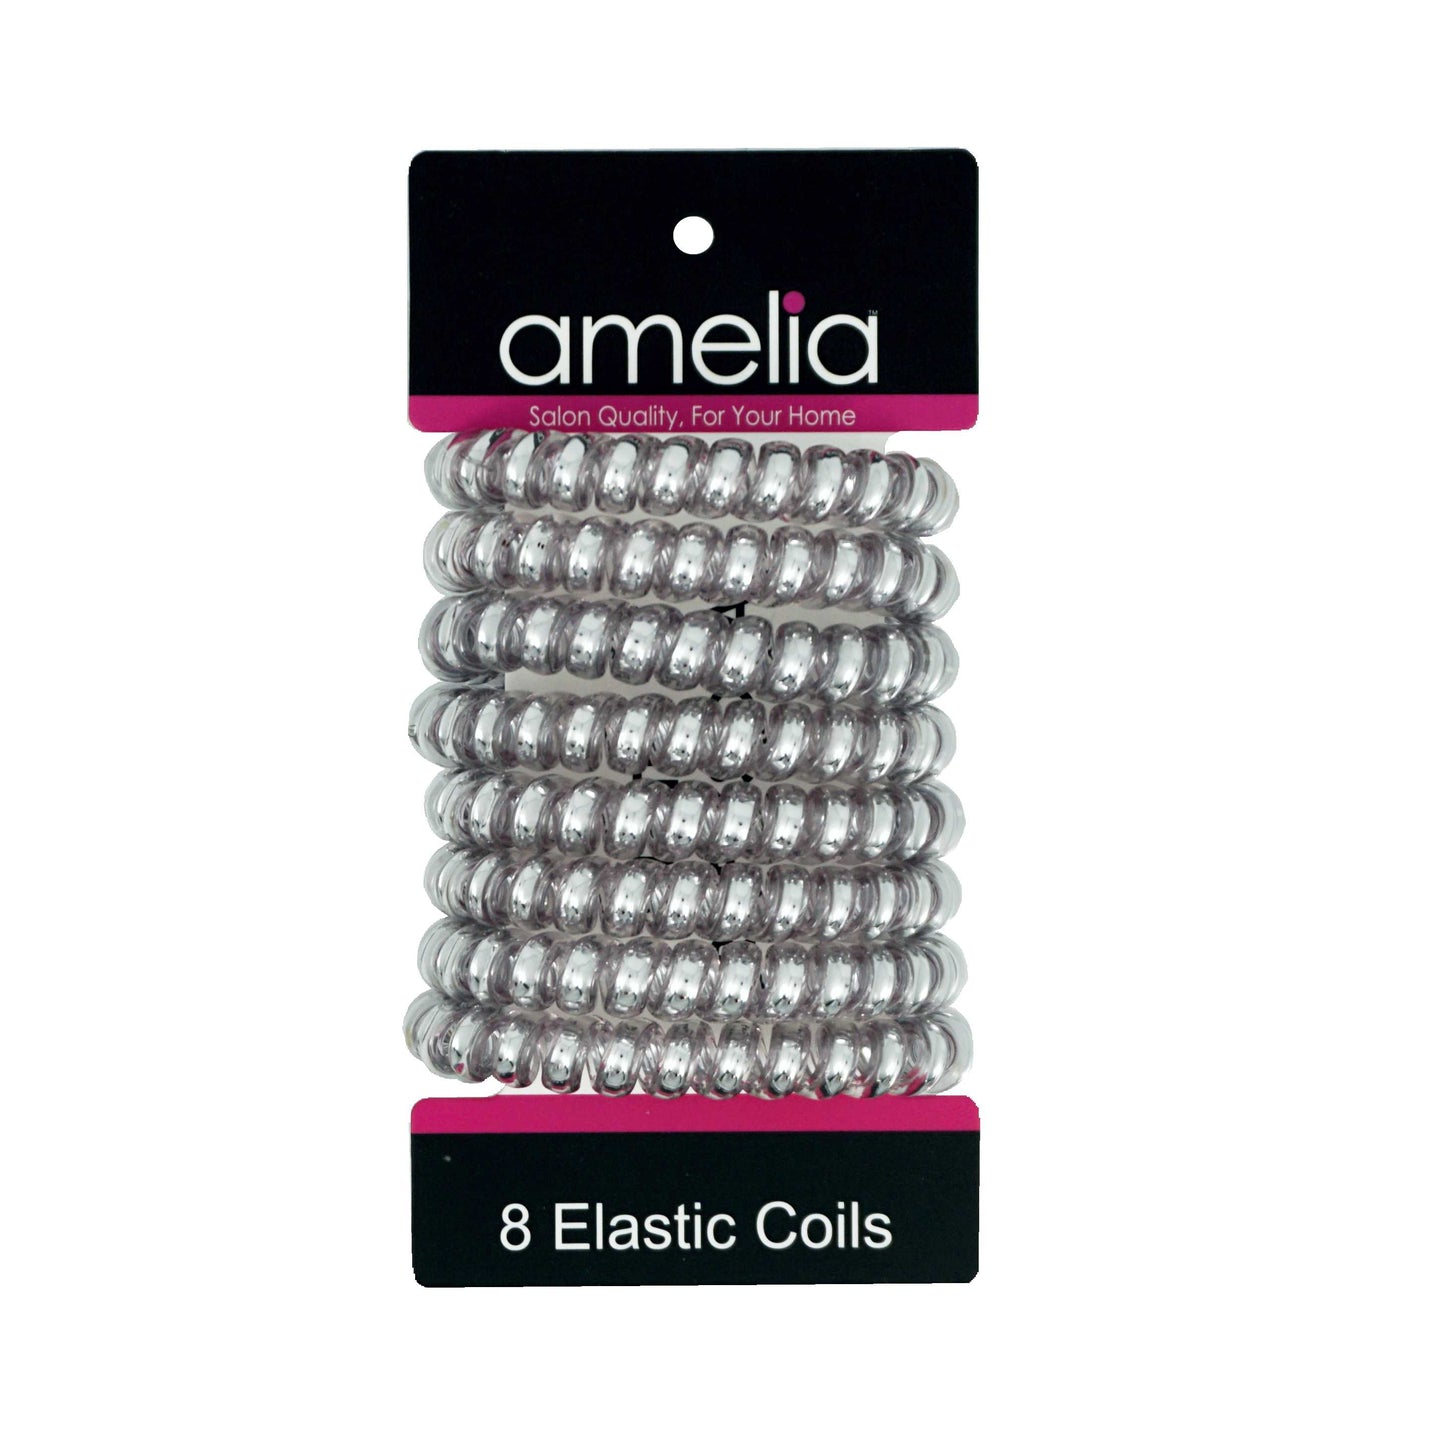 Amelia Beauty Products 8 Large Smooth Shiny Center Elastic Hair Coils, 2. 5in Diameter Thick Spiral Hair Ties, Gentle on Hair, Strong Hold and Minimizes Dents and Creases, Gray